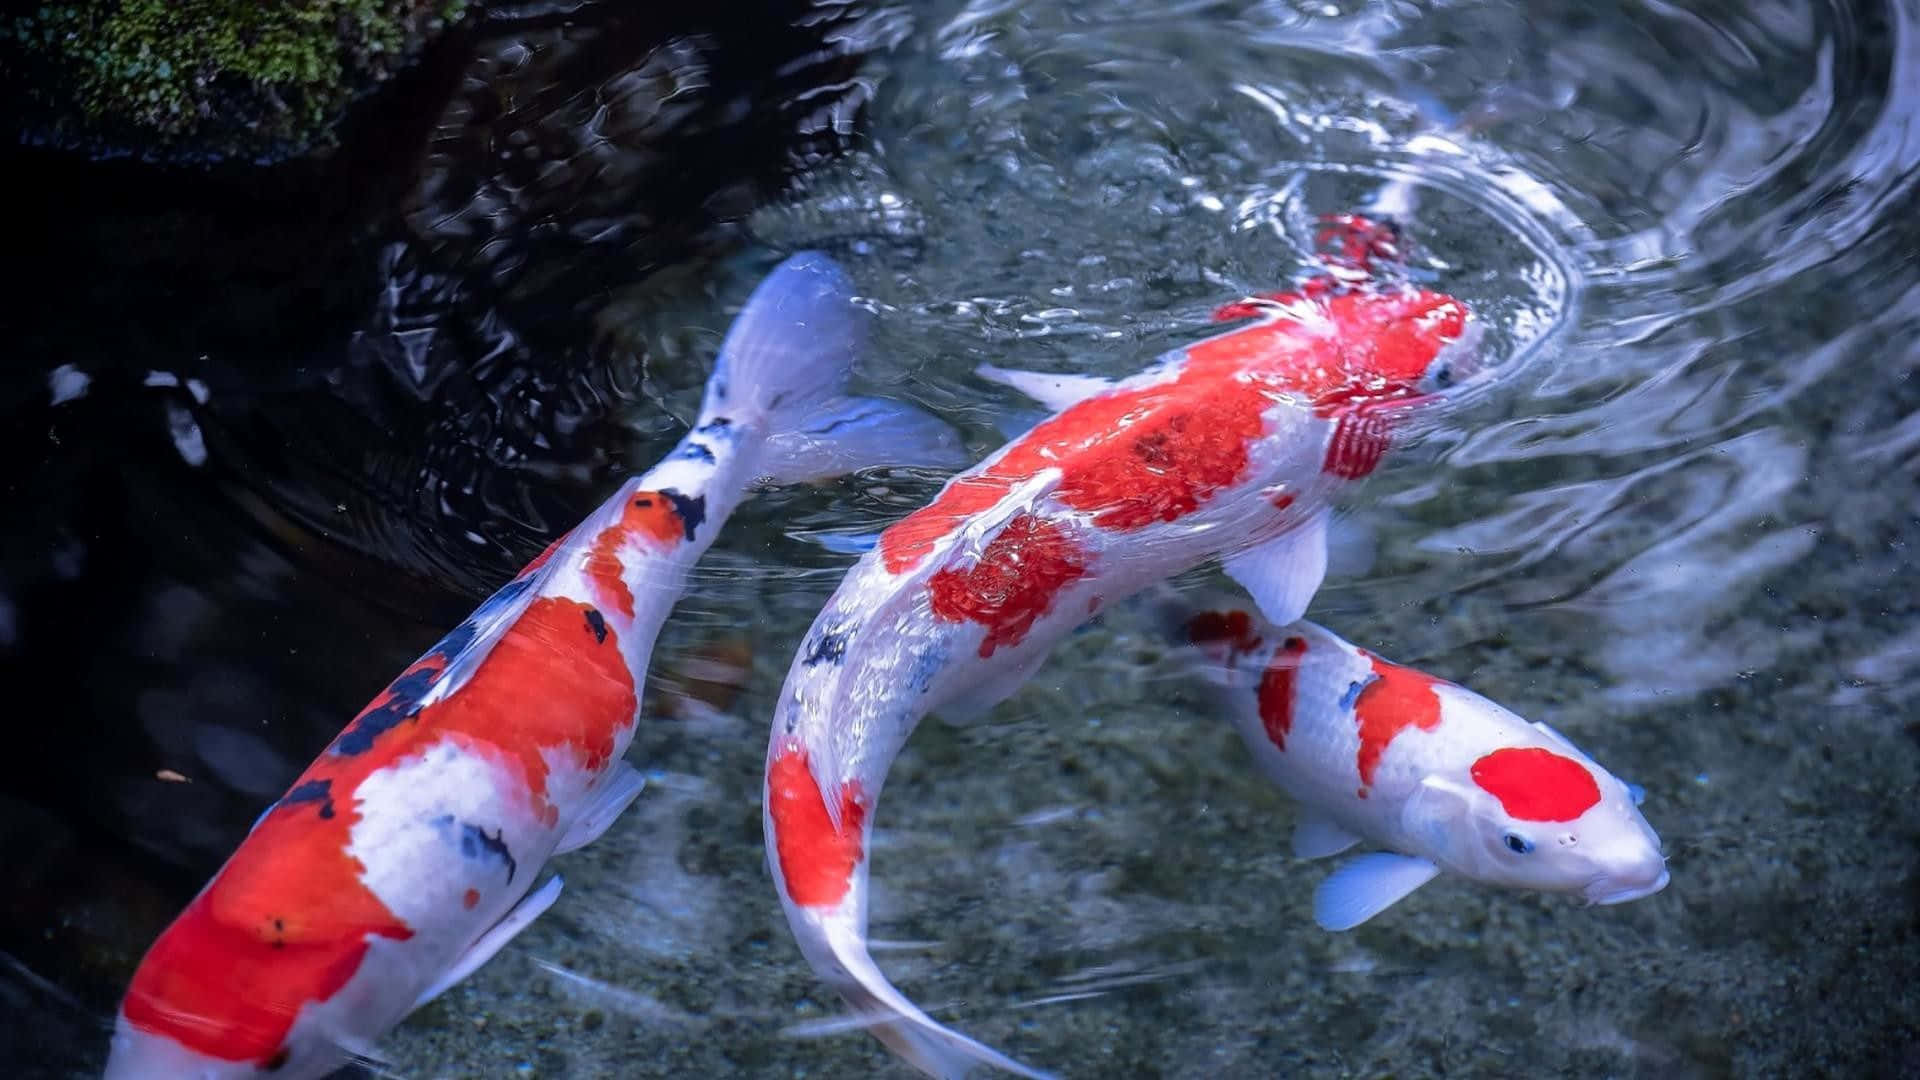 Live Koi Fish In A Pond With Rocks Wallpaper